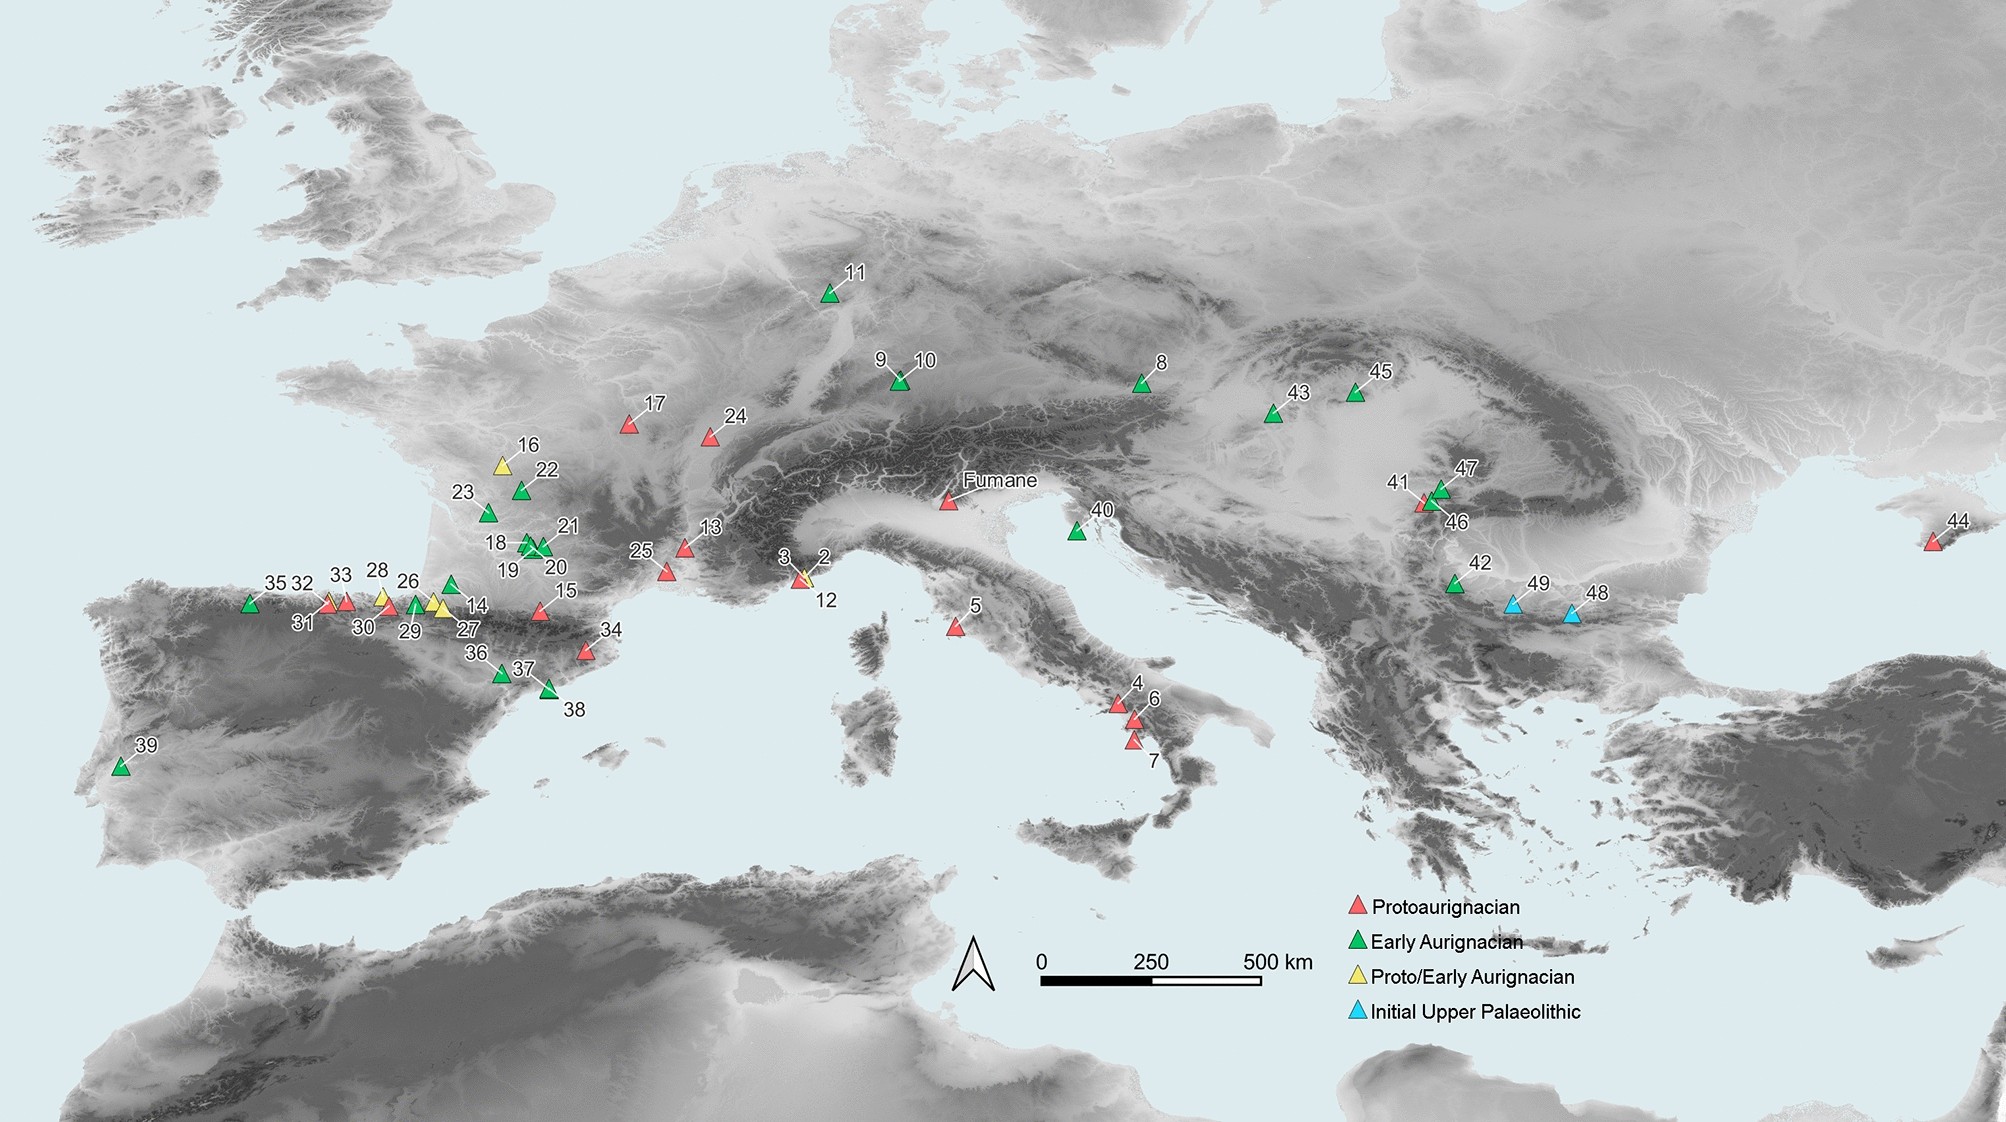 Subsistence of early anatomically modern humans in Europe as evidenced in  the Protoaurignacian occupations of Fumane Cave, Italy | Scientific Reports